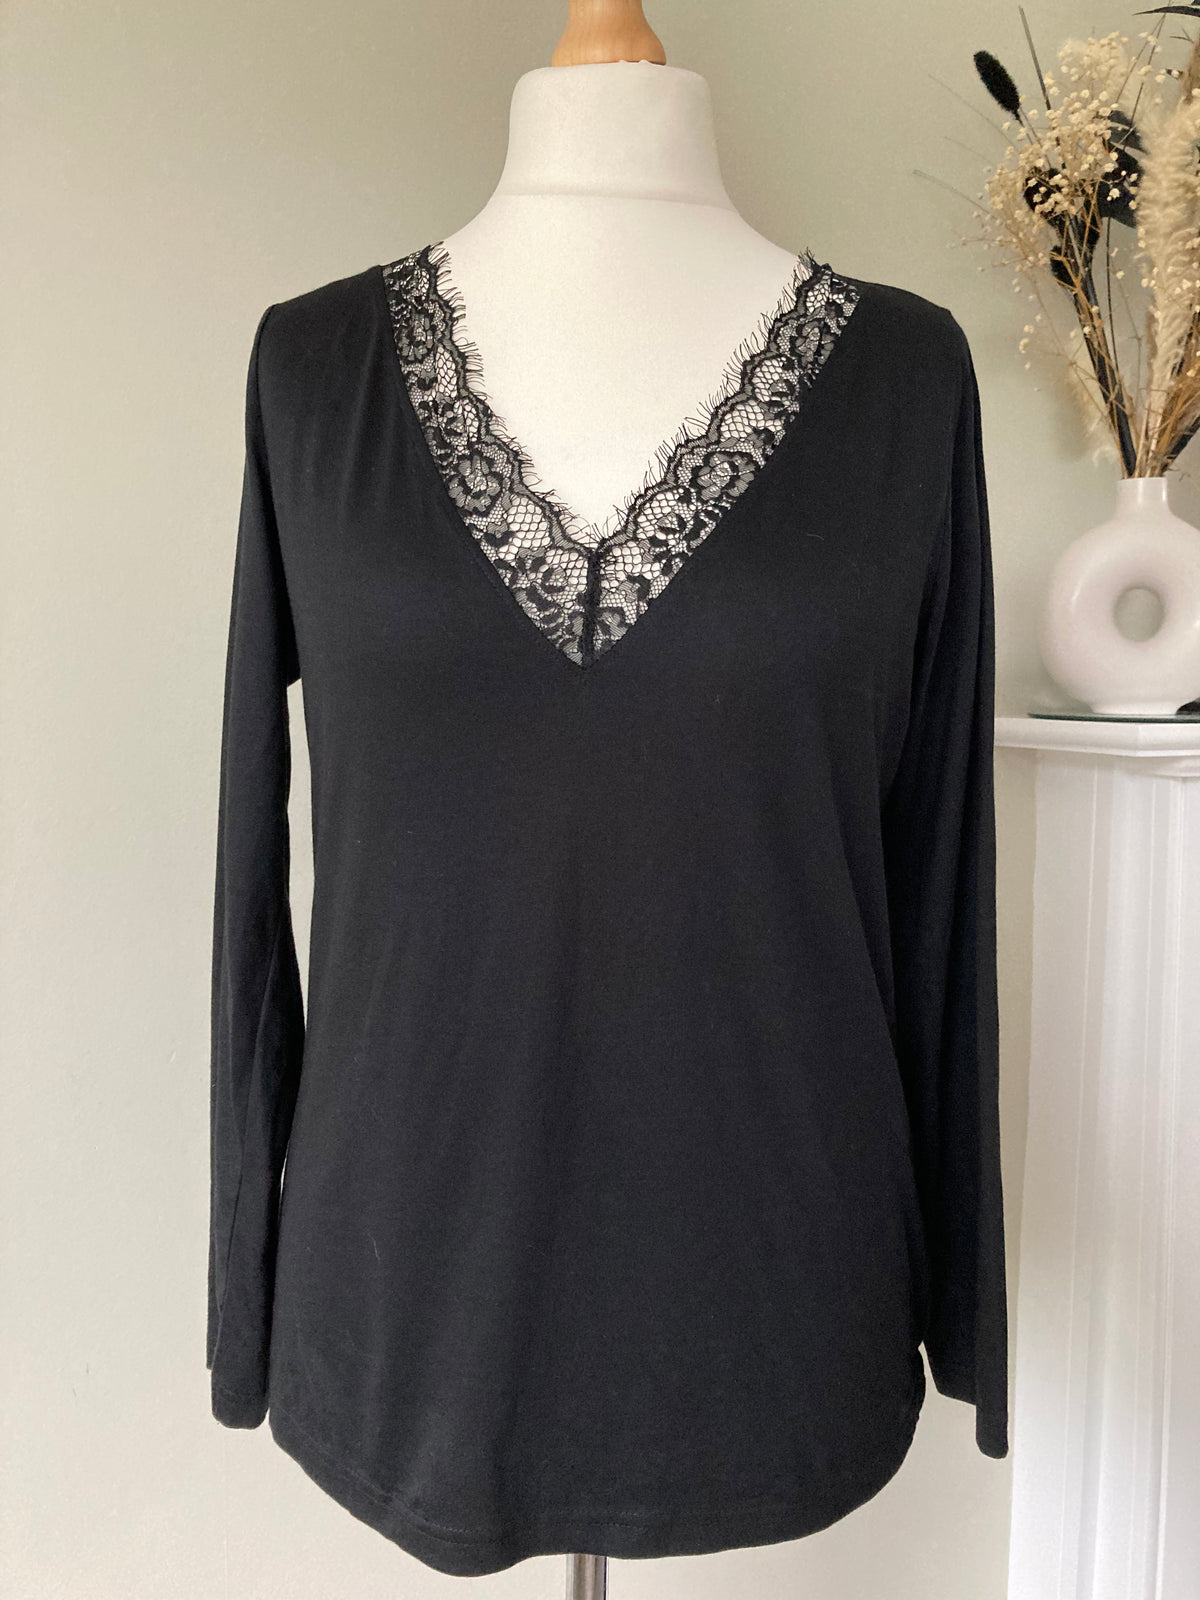 Black lace long sleeve pj top by CREATION L - Size 14